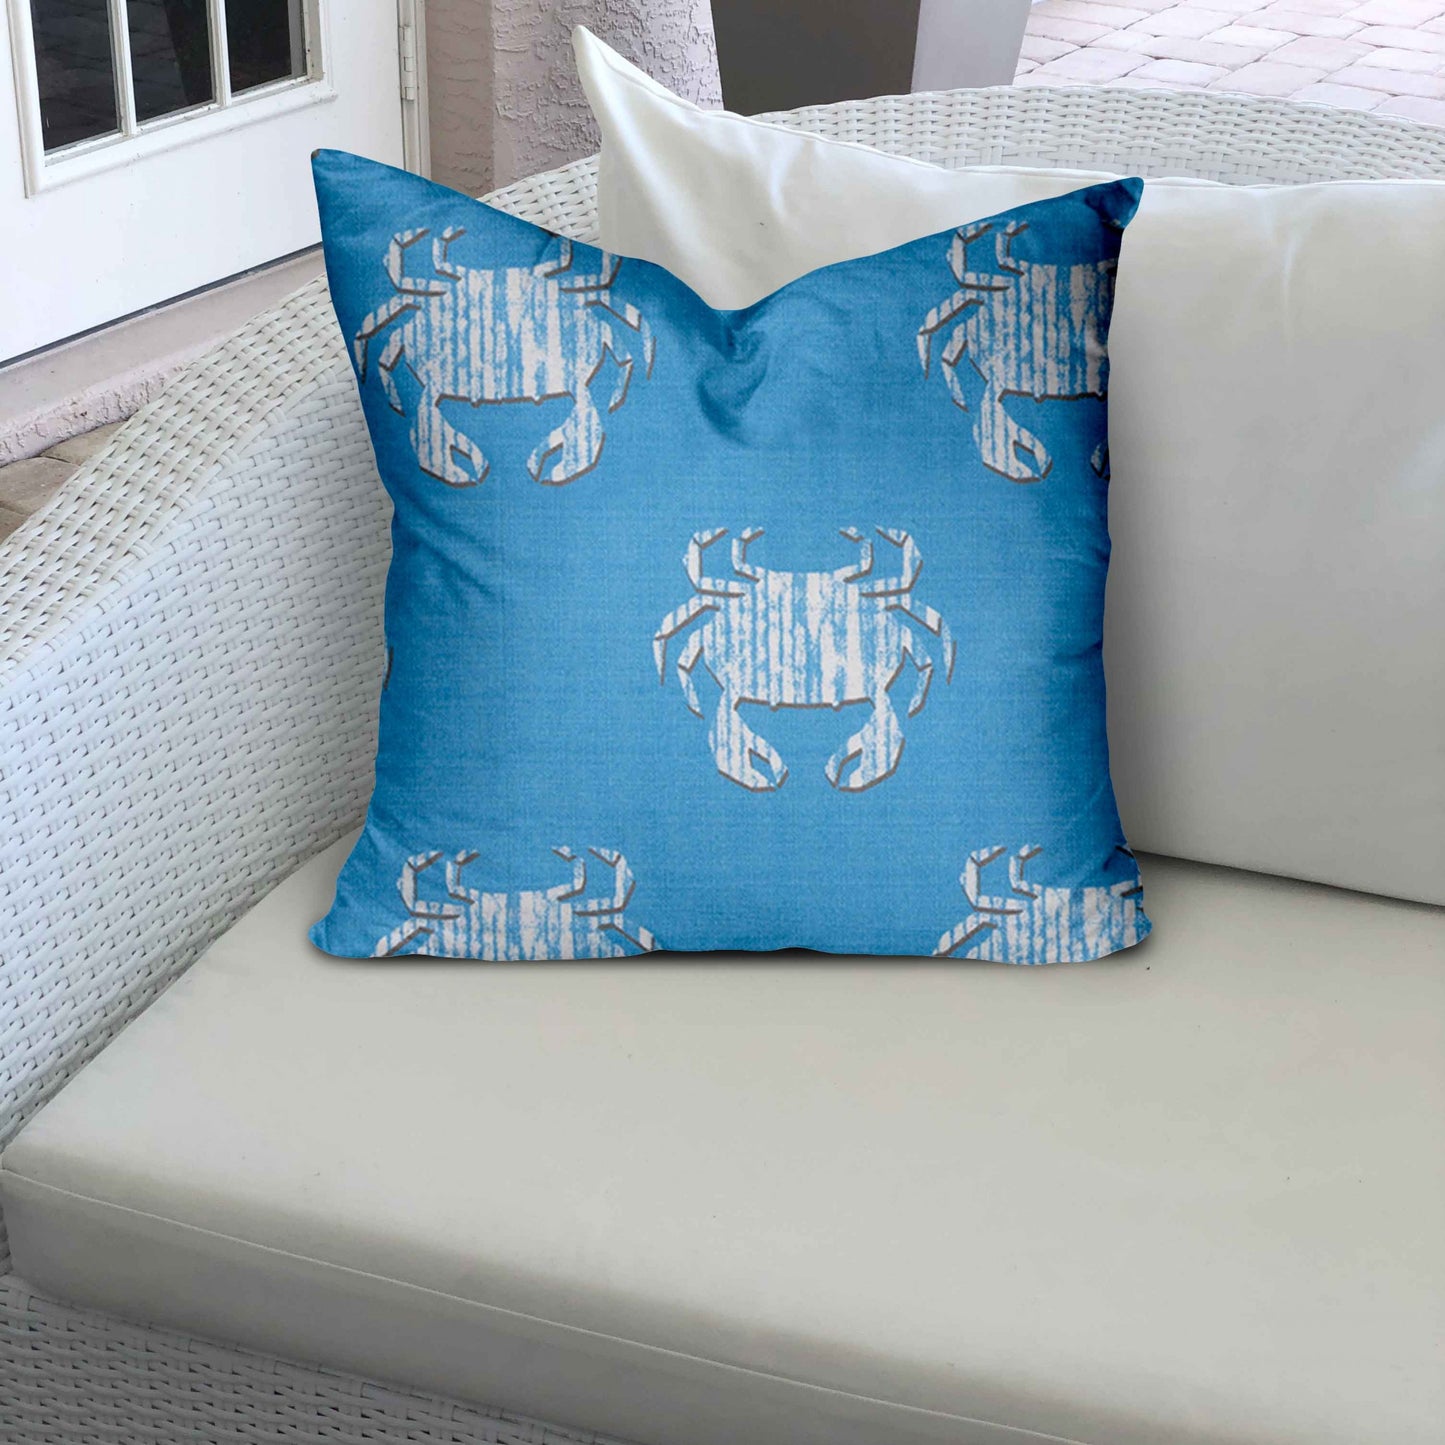 26" X 26" Blue And White Crab Zippered Coastal Throw Indoor Outdoor Pillow